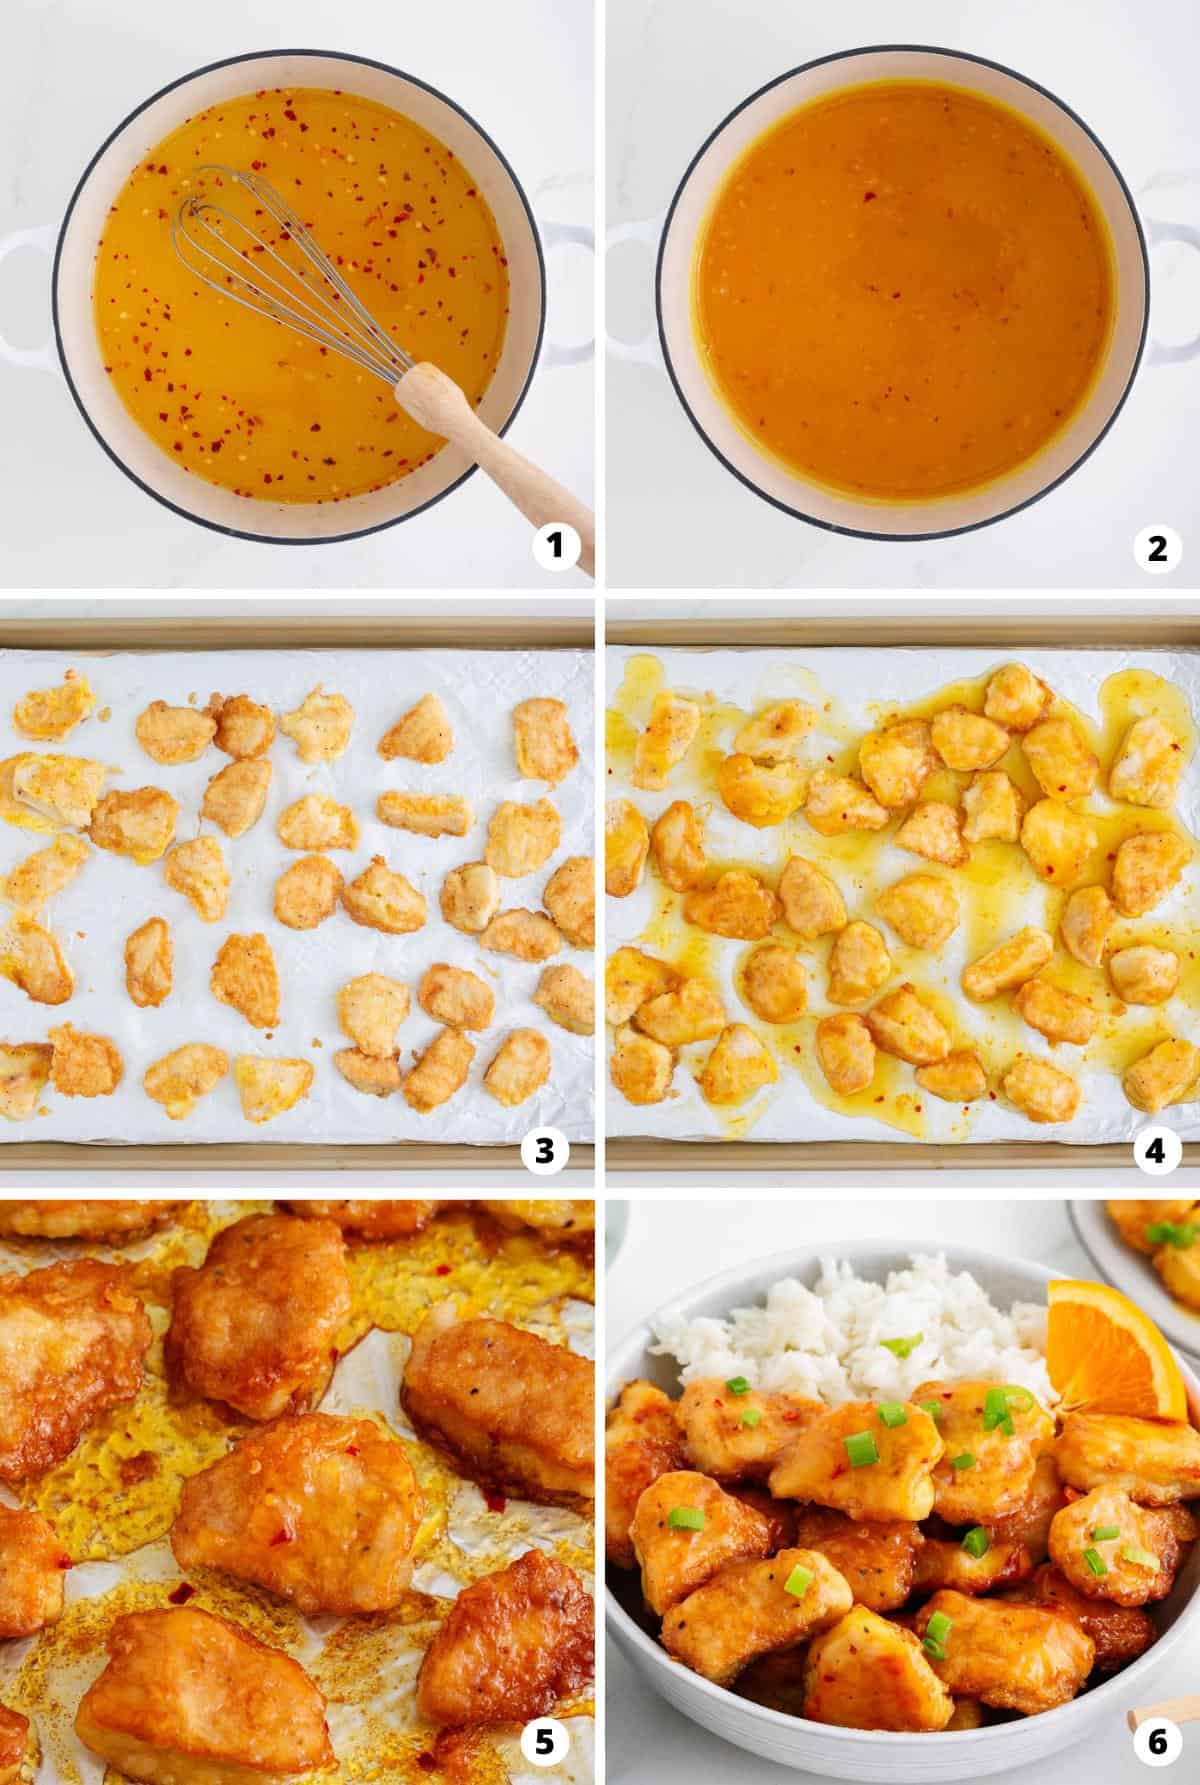 Showing how to make orange chicken in a 6 step collage.